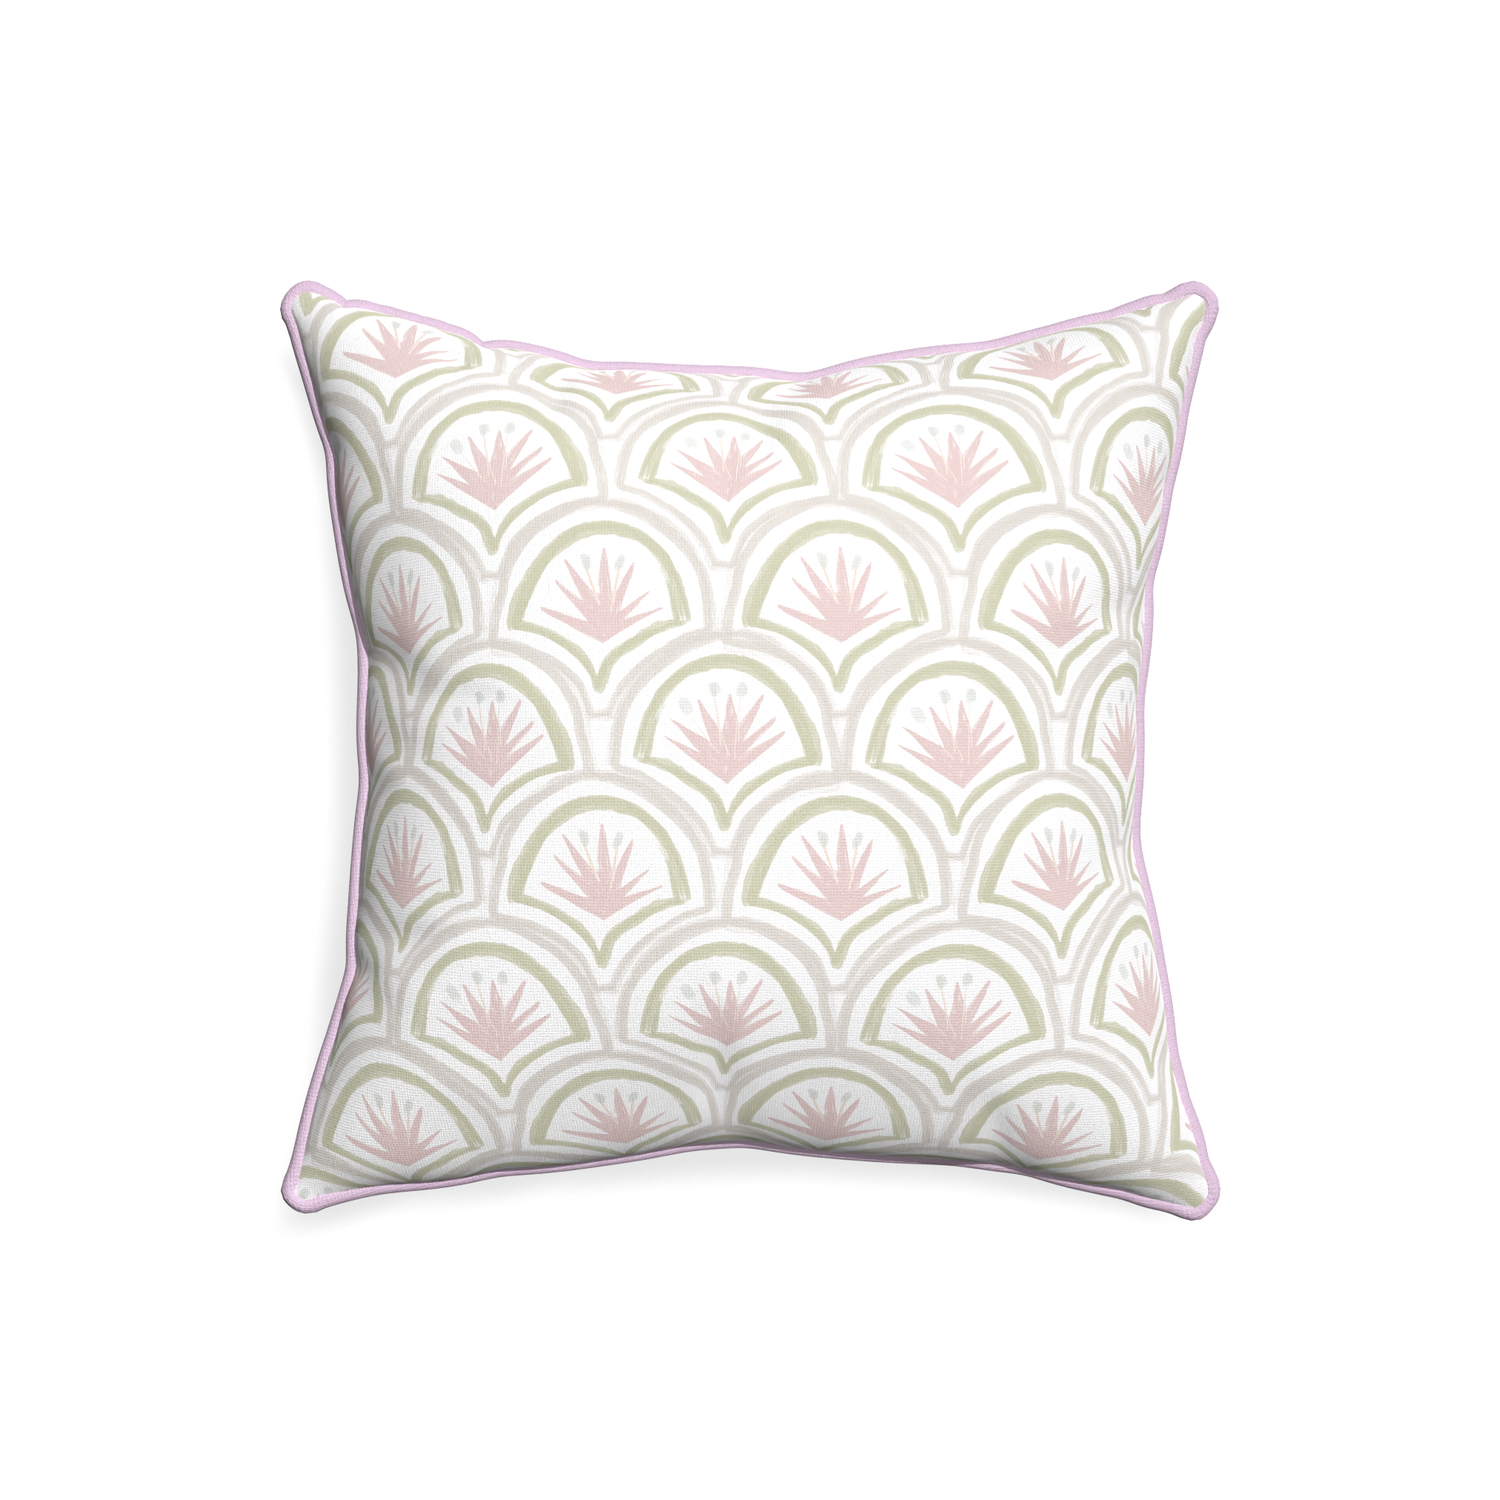 20-square thatcher rose custom pillow with l piping on white background